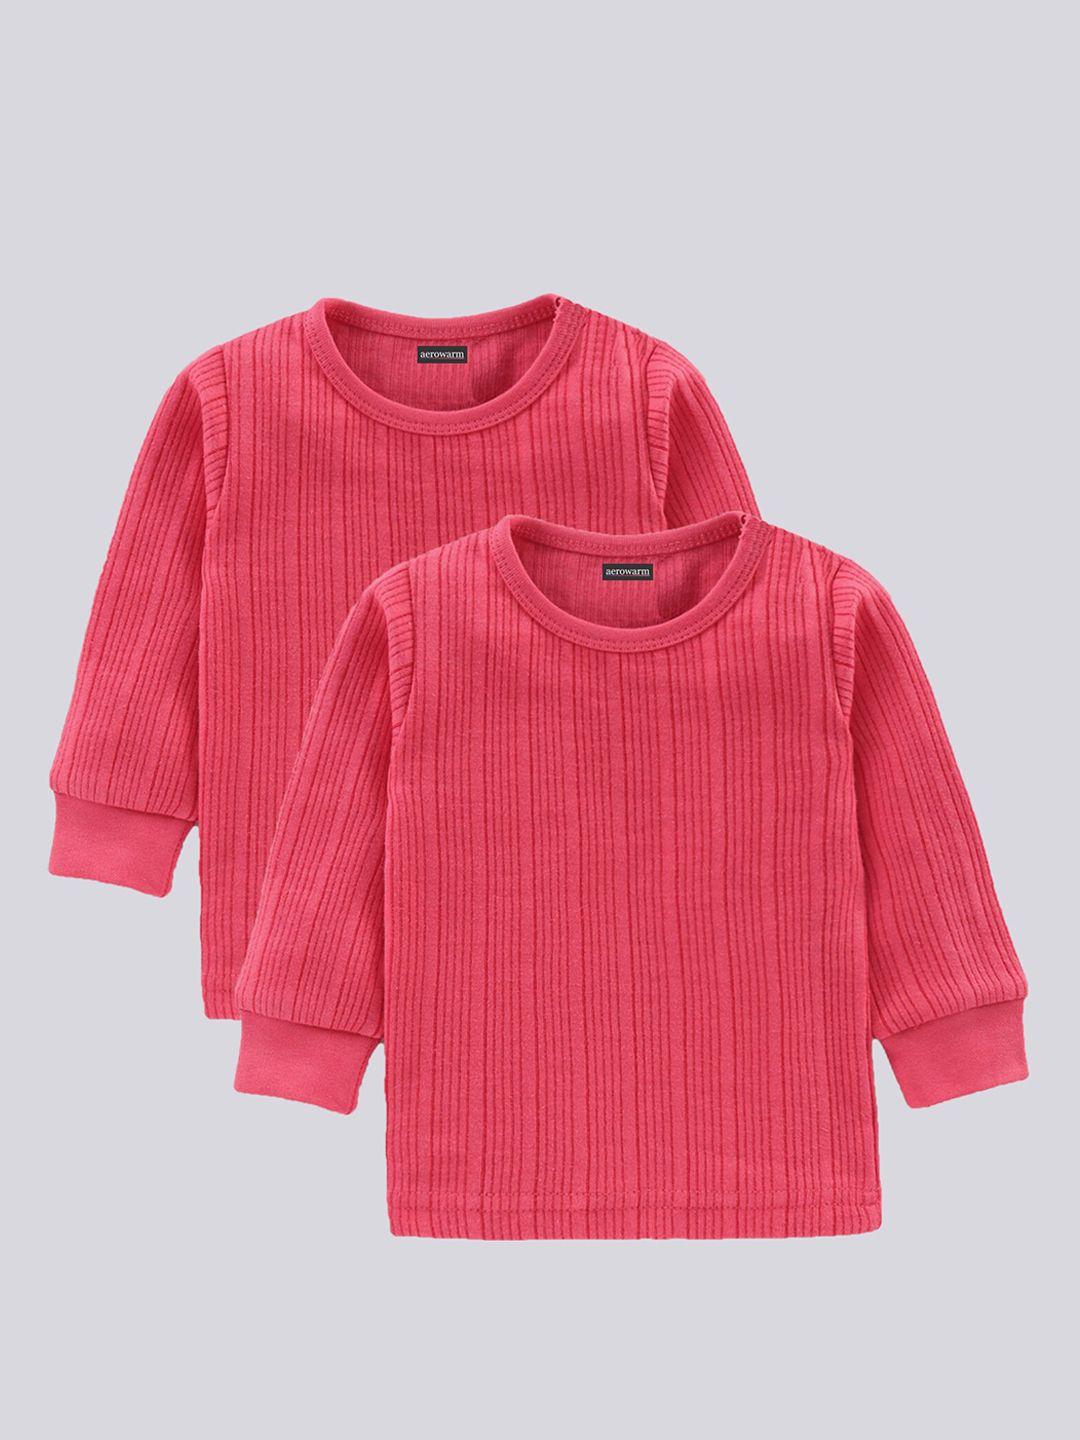 aerowarm infants pack of 2 coral self striped thermal tops